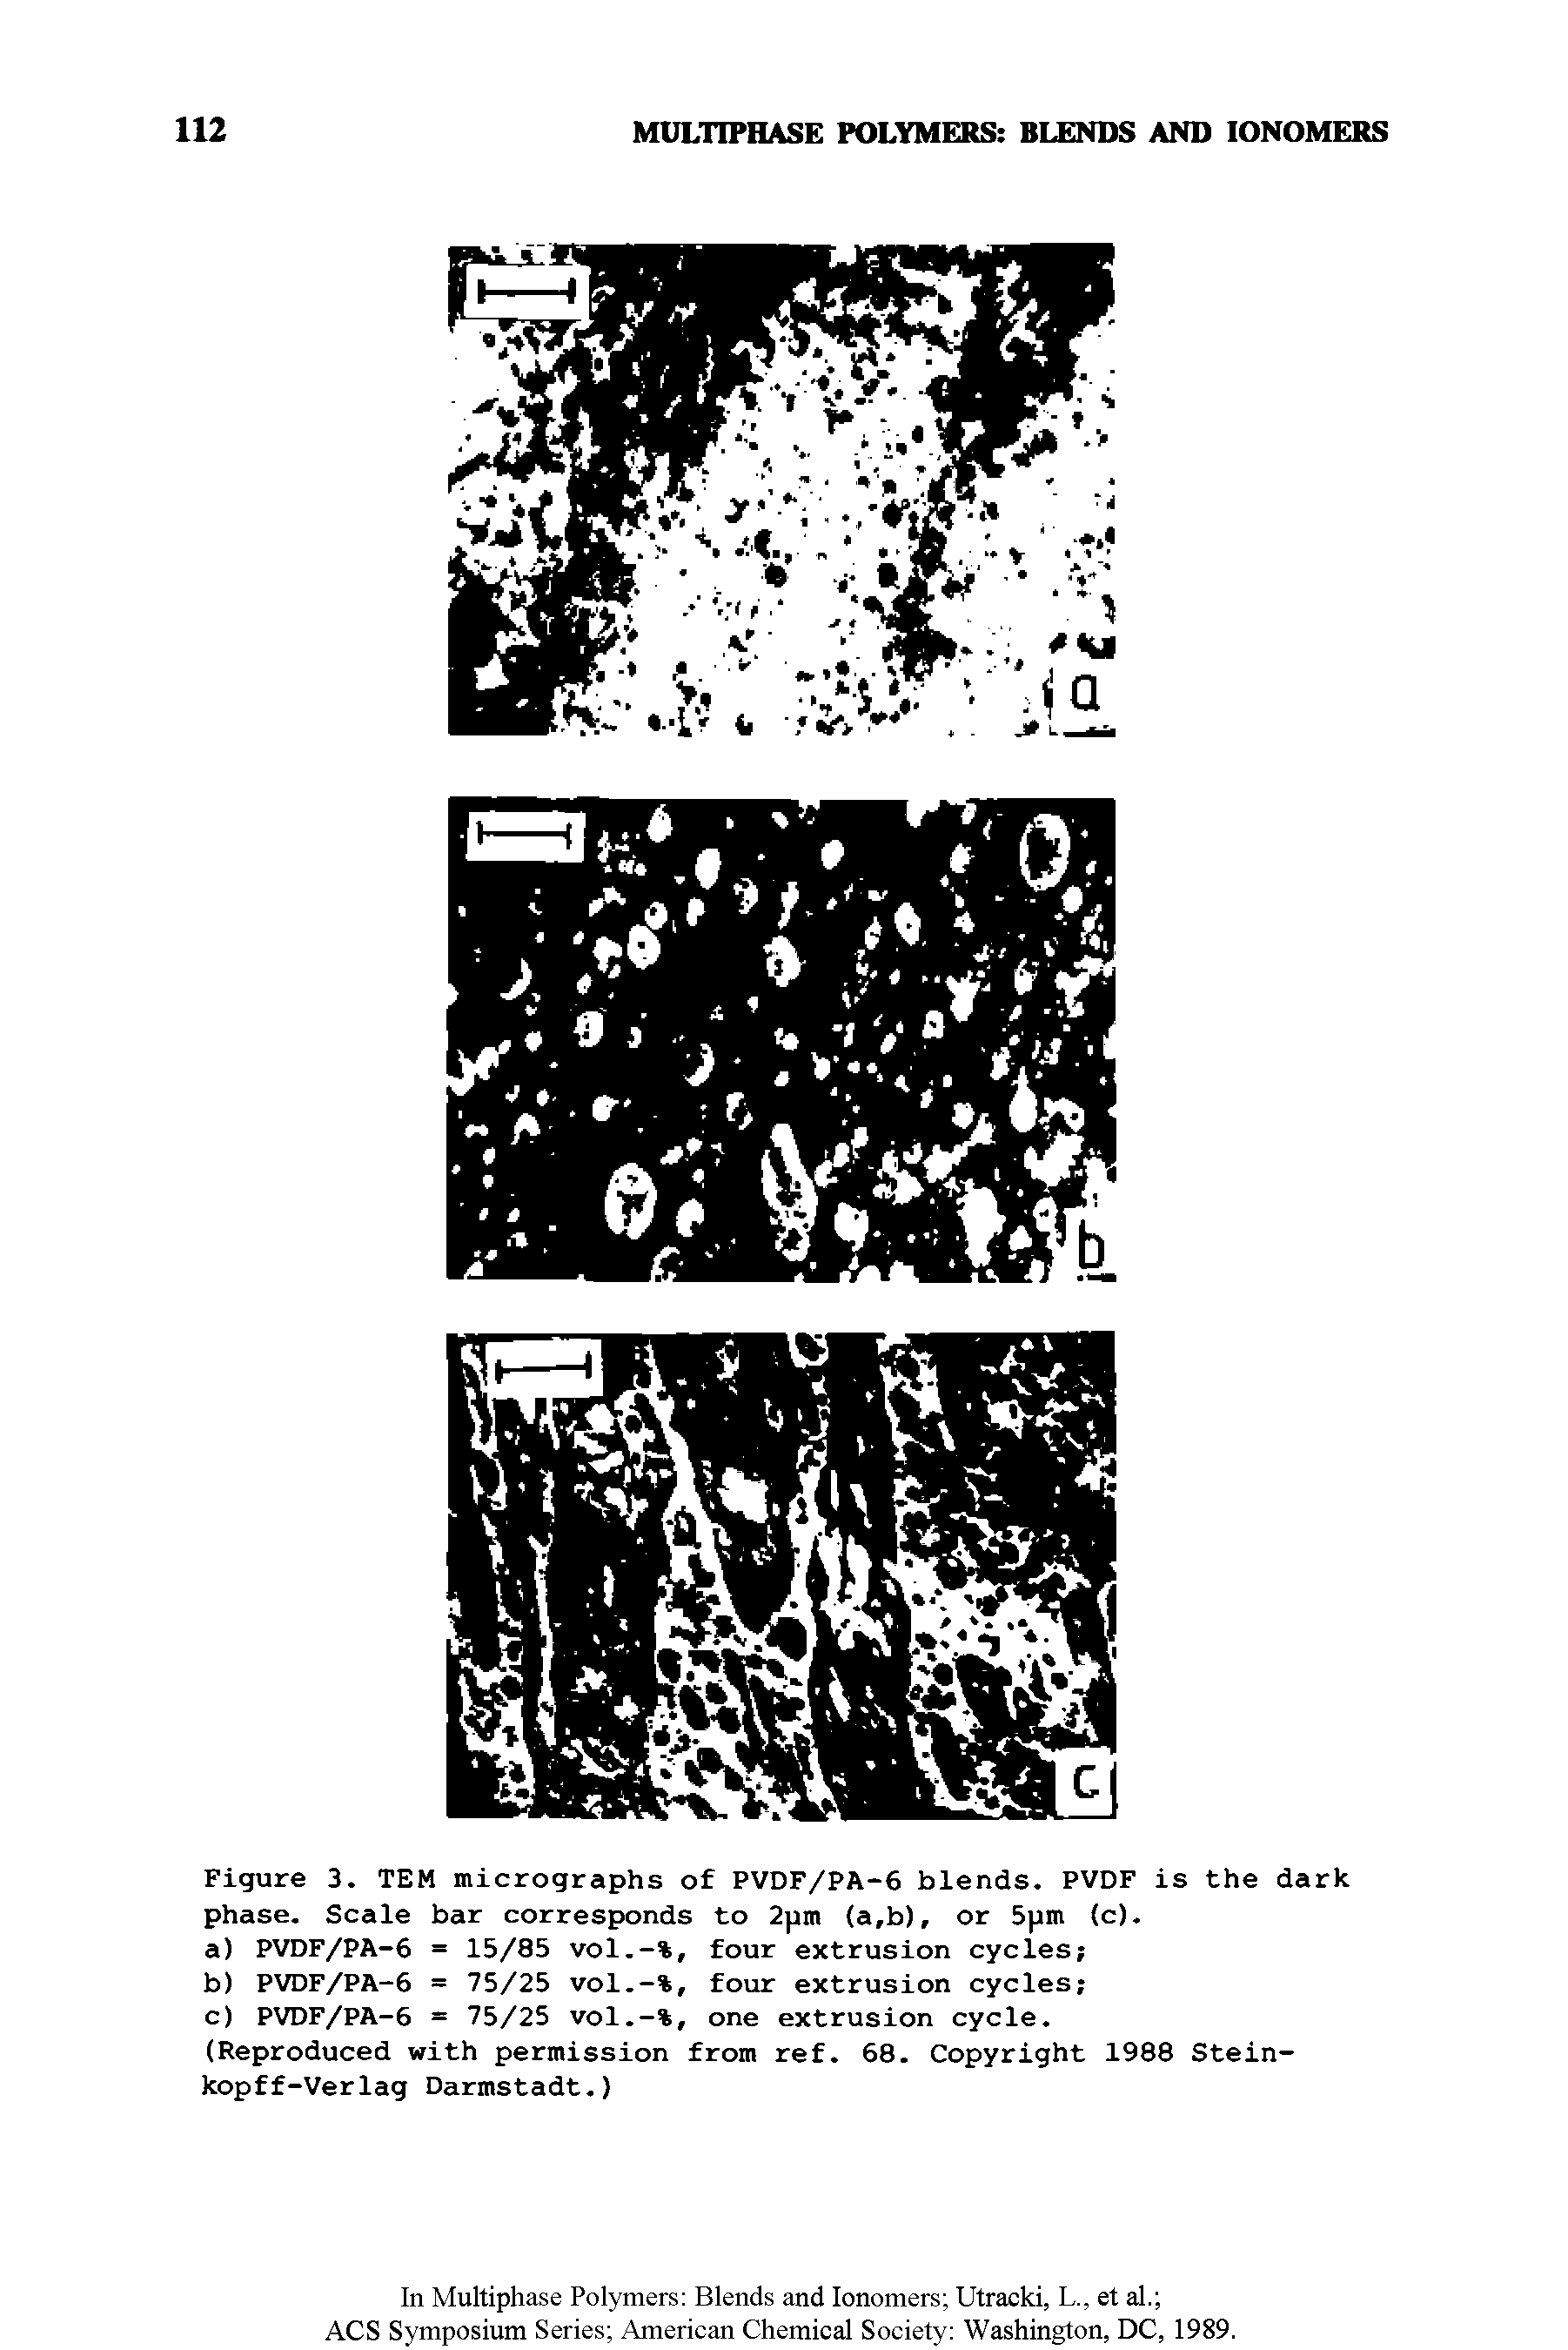 Figure 3. TEM micrographs of PVDF/PA-6 blends. PVDF is the dark phase. Scale bar corresponds to 2pm (a,b), or 5pm (c).